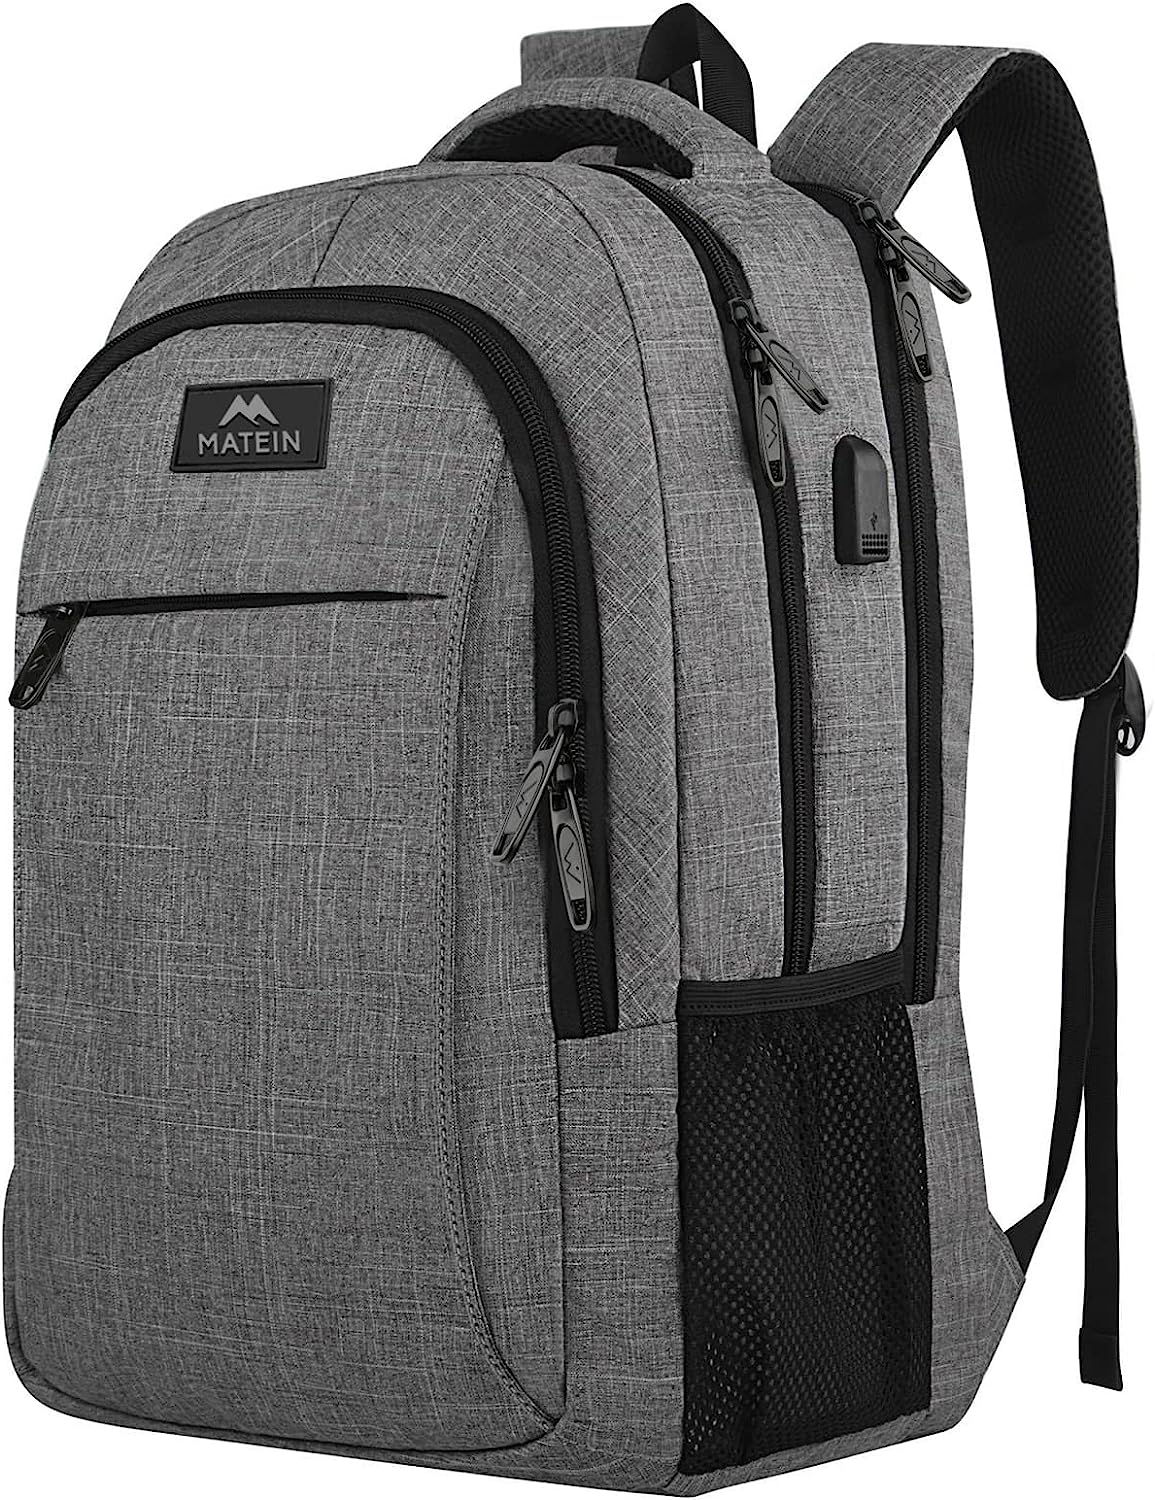 MATEIN Travel Laptop Backpack, Business Anti Theft [...]